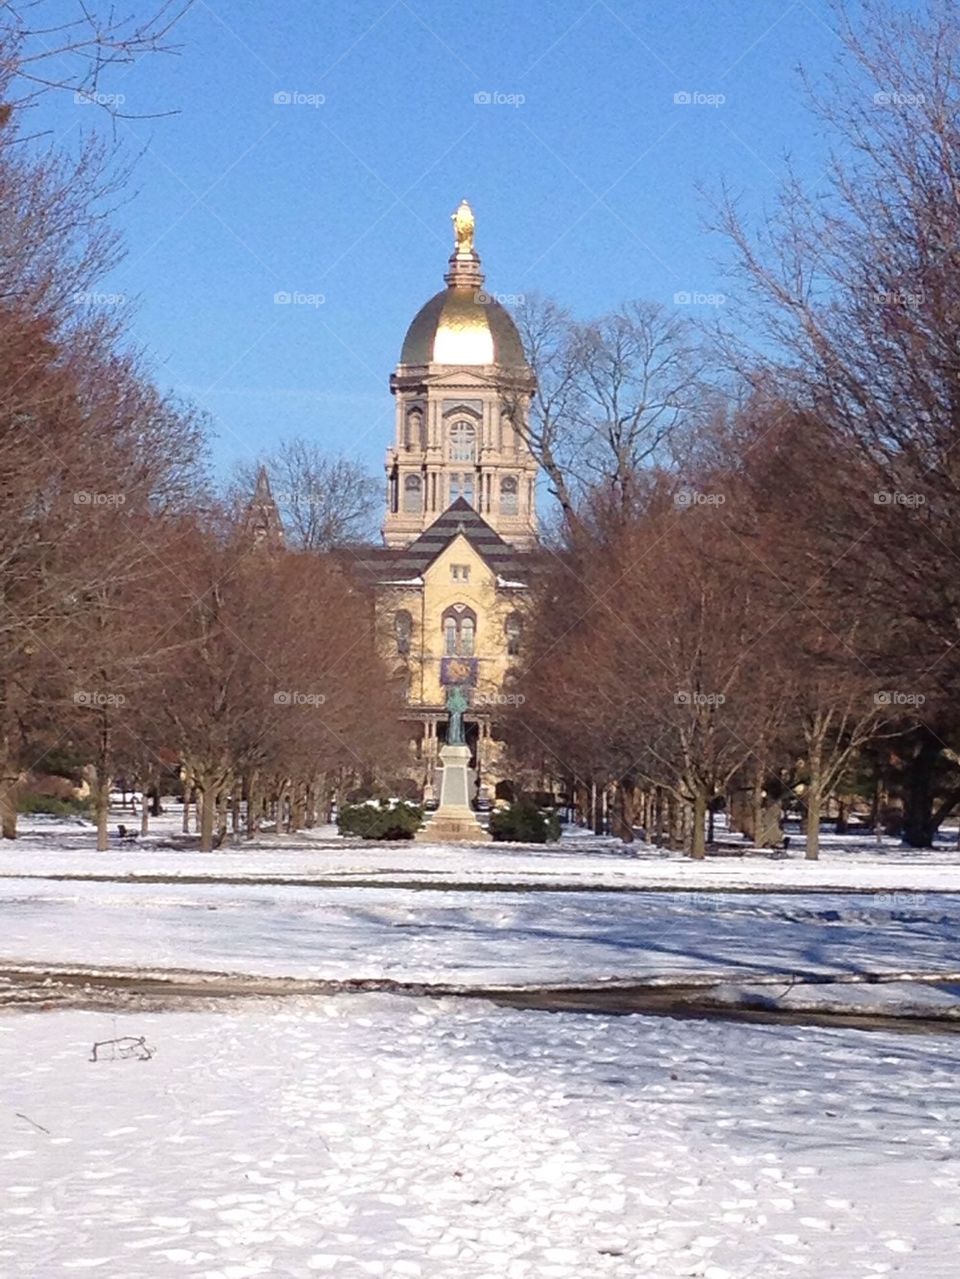 The Golden Dome of ND